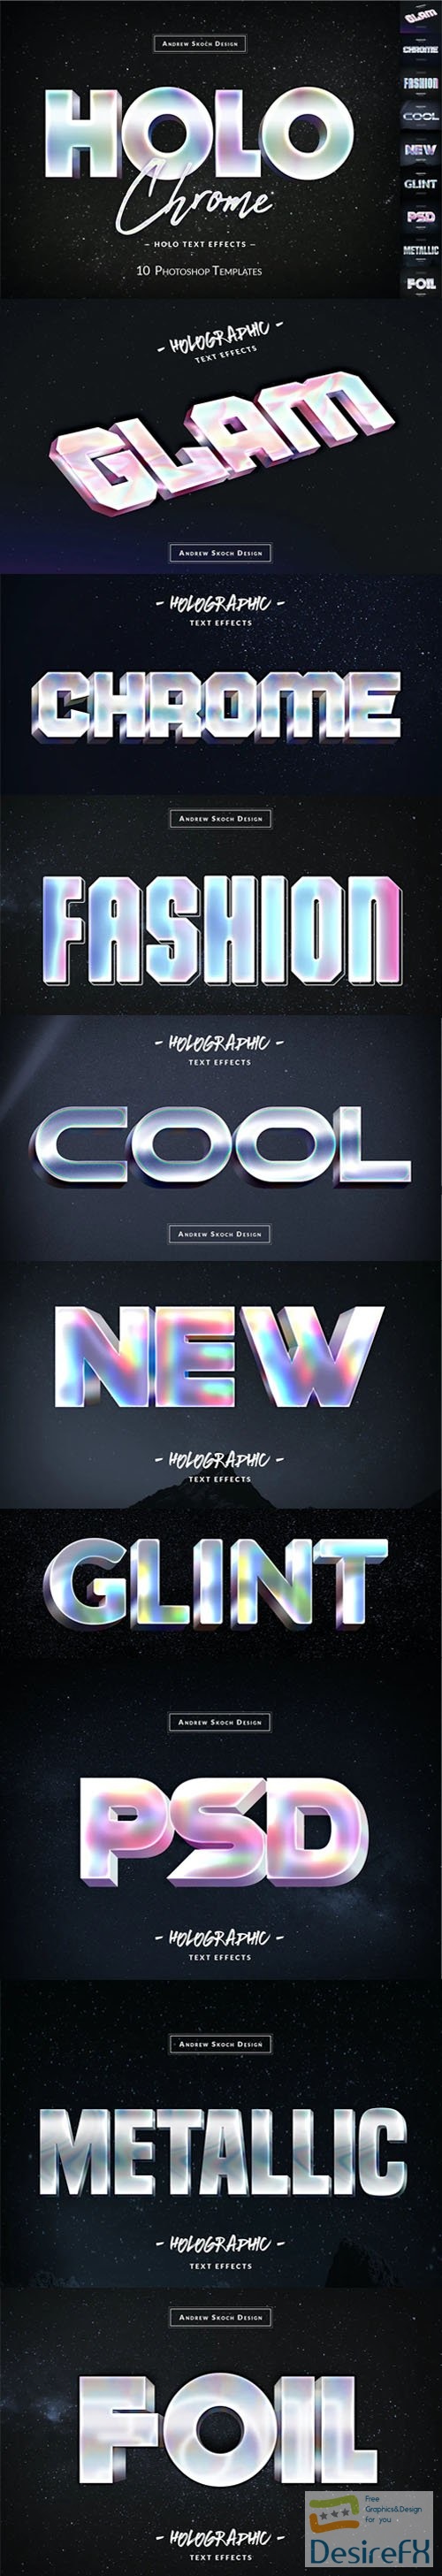 10 Holochrome Photoshop Text Effects Templates